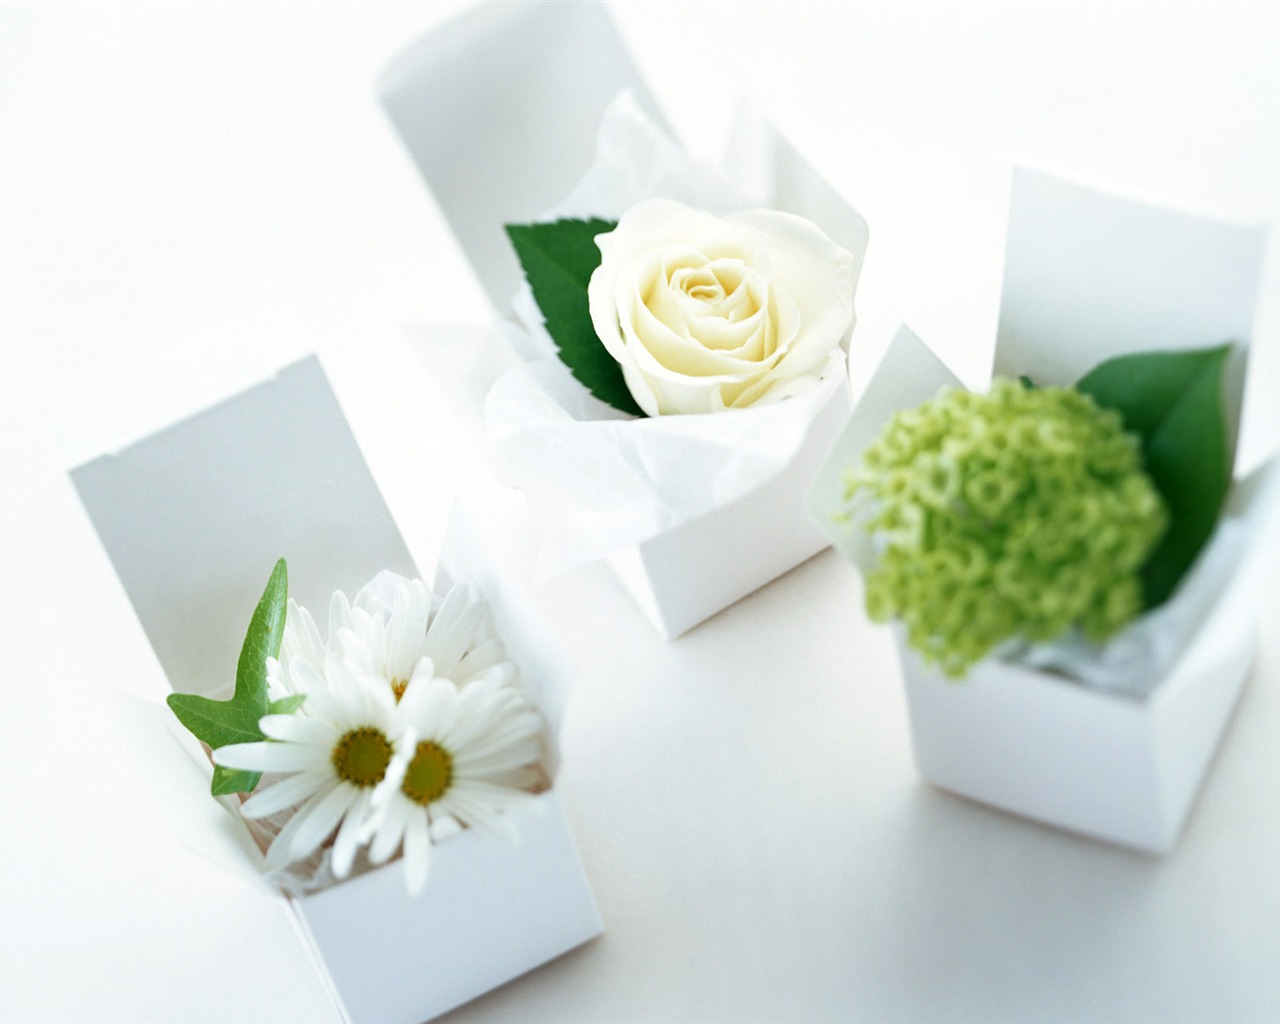 Flowers and gifts wallpaper (1) #16 - 1280x1024